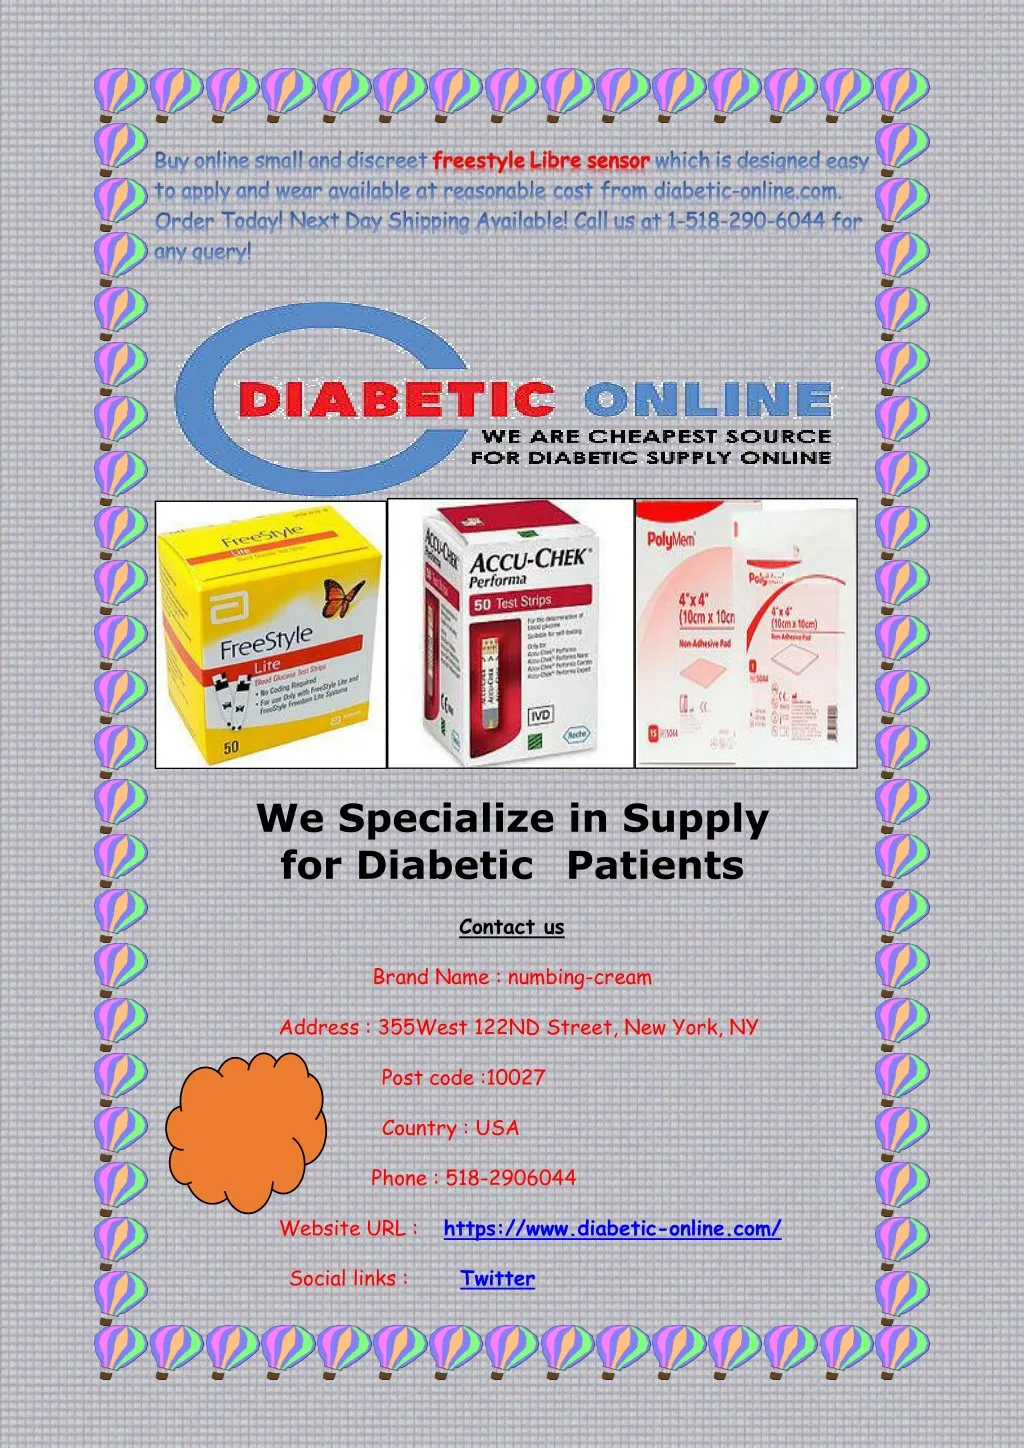 we specialize in supply for diabetic patients